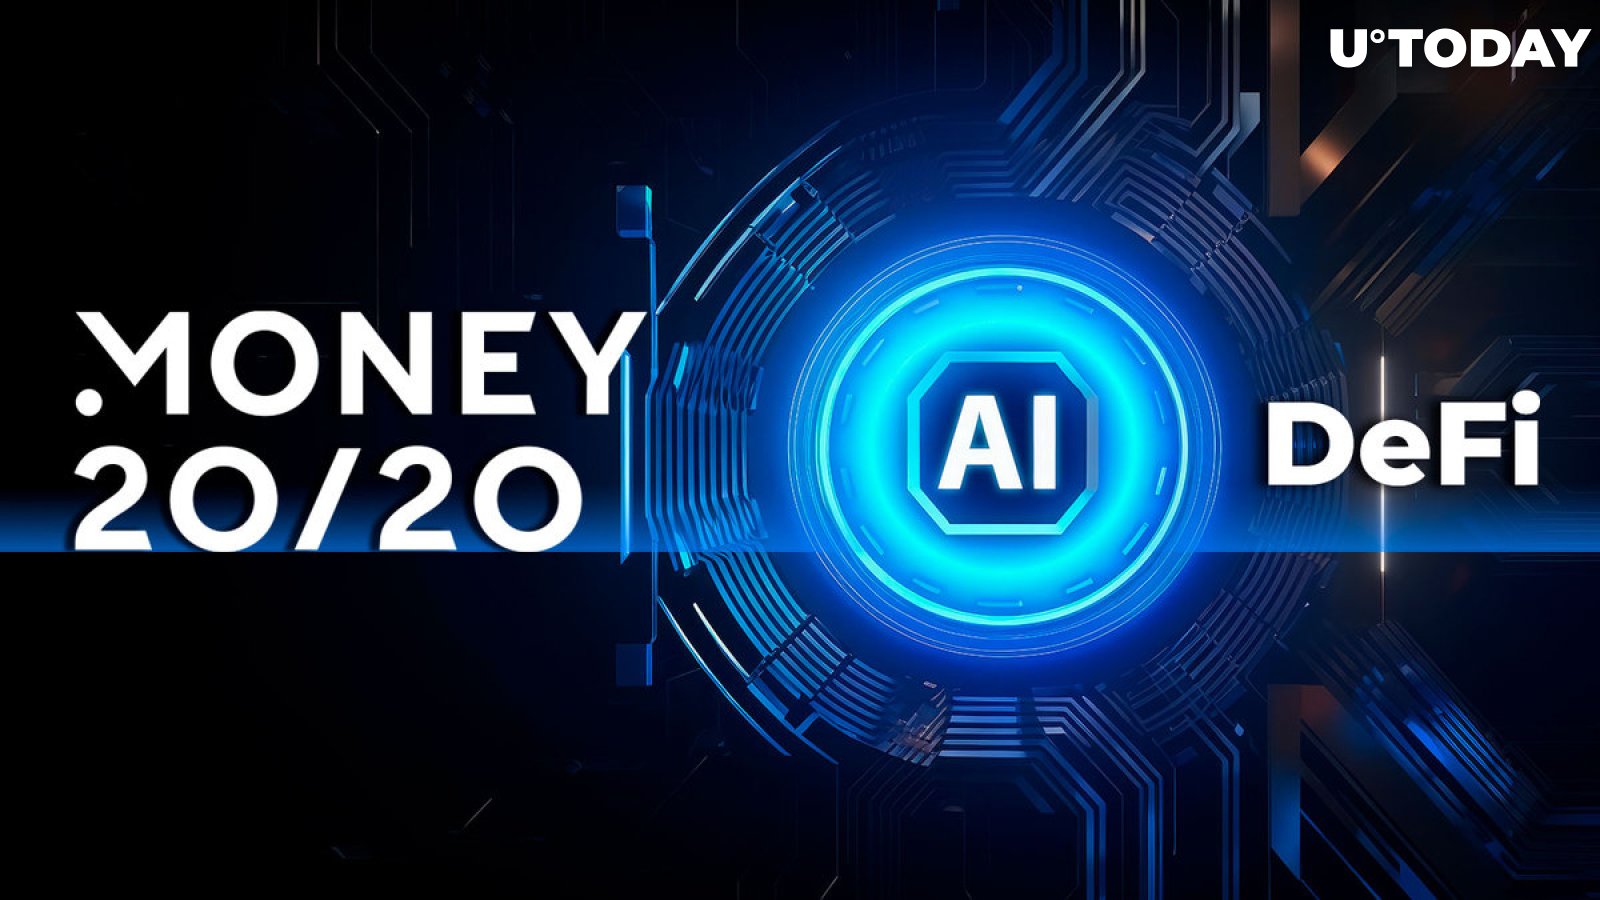 Money20/20 Asia Conference Makes Headlines With Ethical AI, DeFi, ESG Discussions